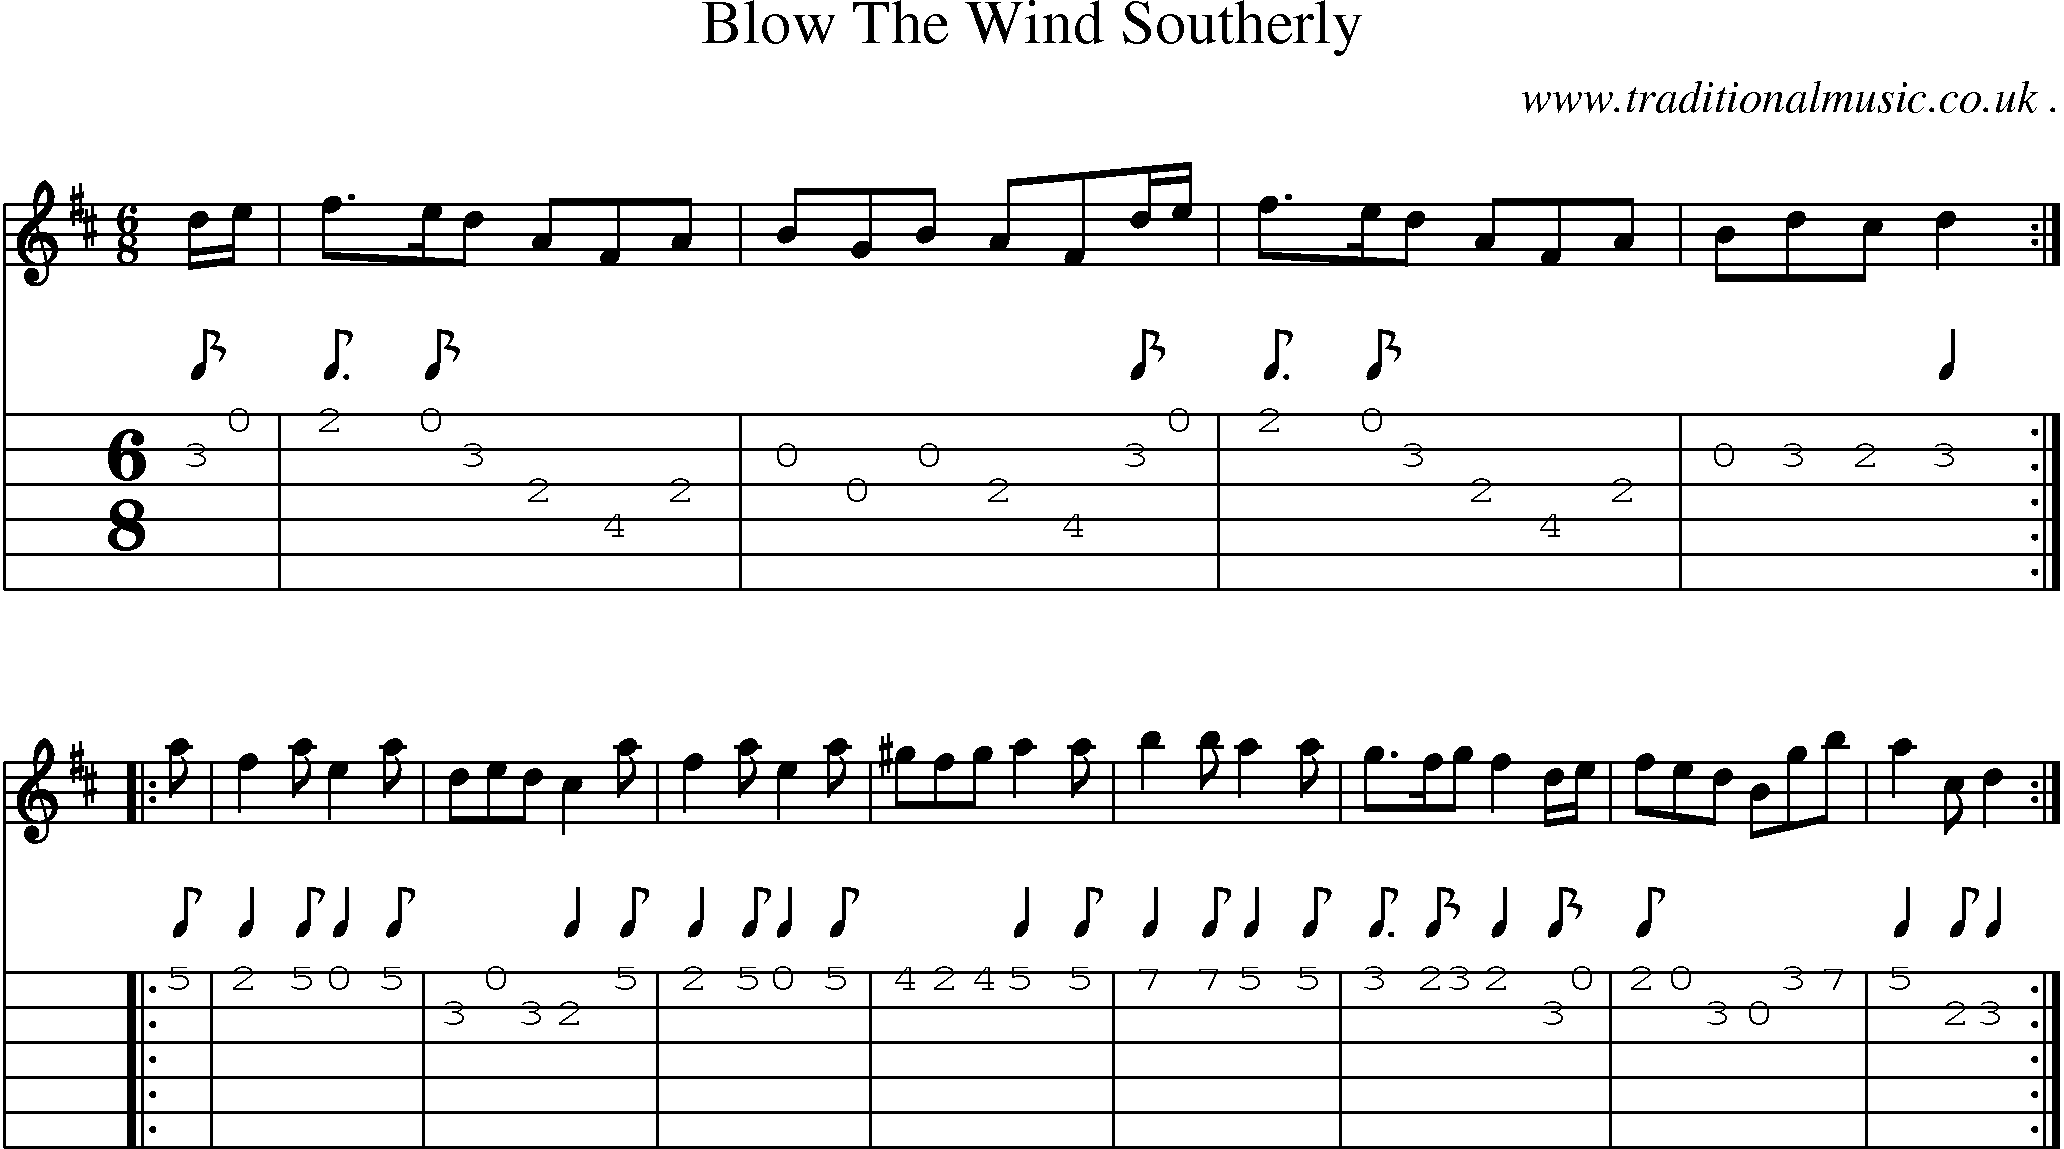 Sheet-Music and Guitar Tabs for Blow The Wind Southerly